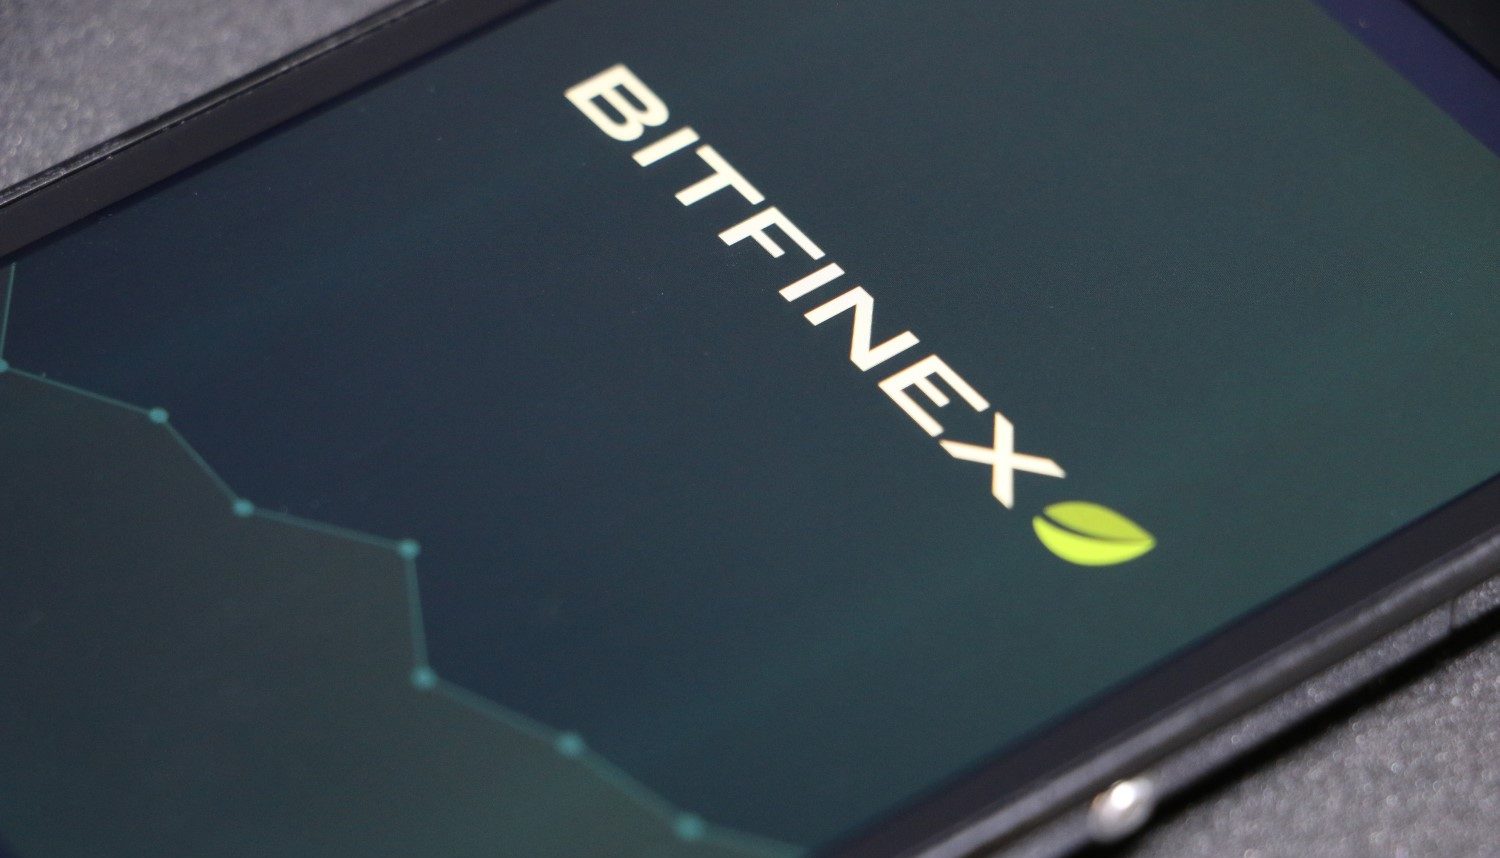 Bitfinex Denies Laundering, Says It’s A Victim Of ‘Fraud’ By Crypto Capital